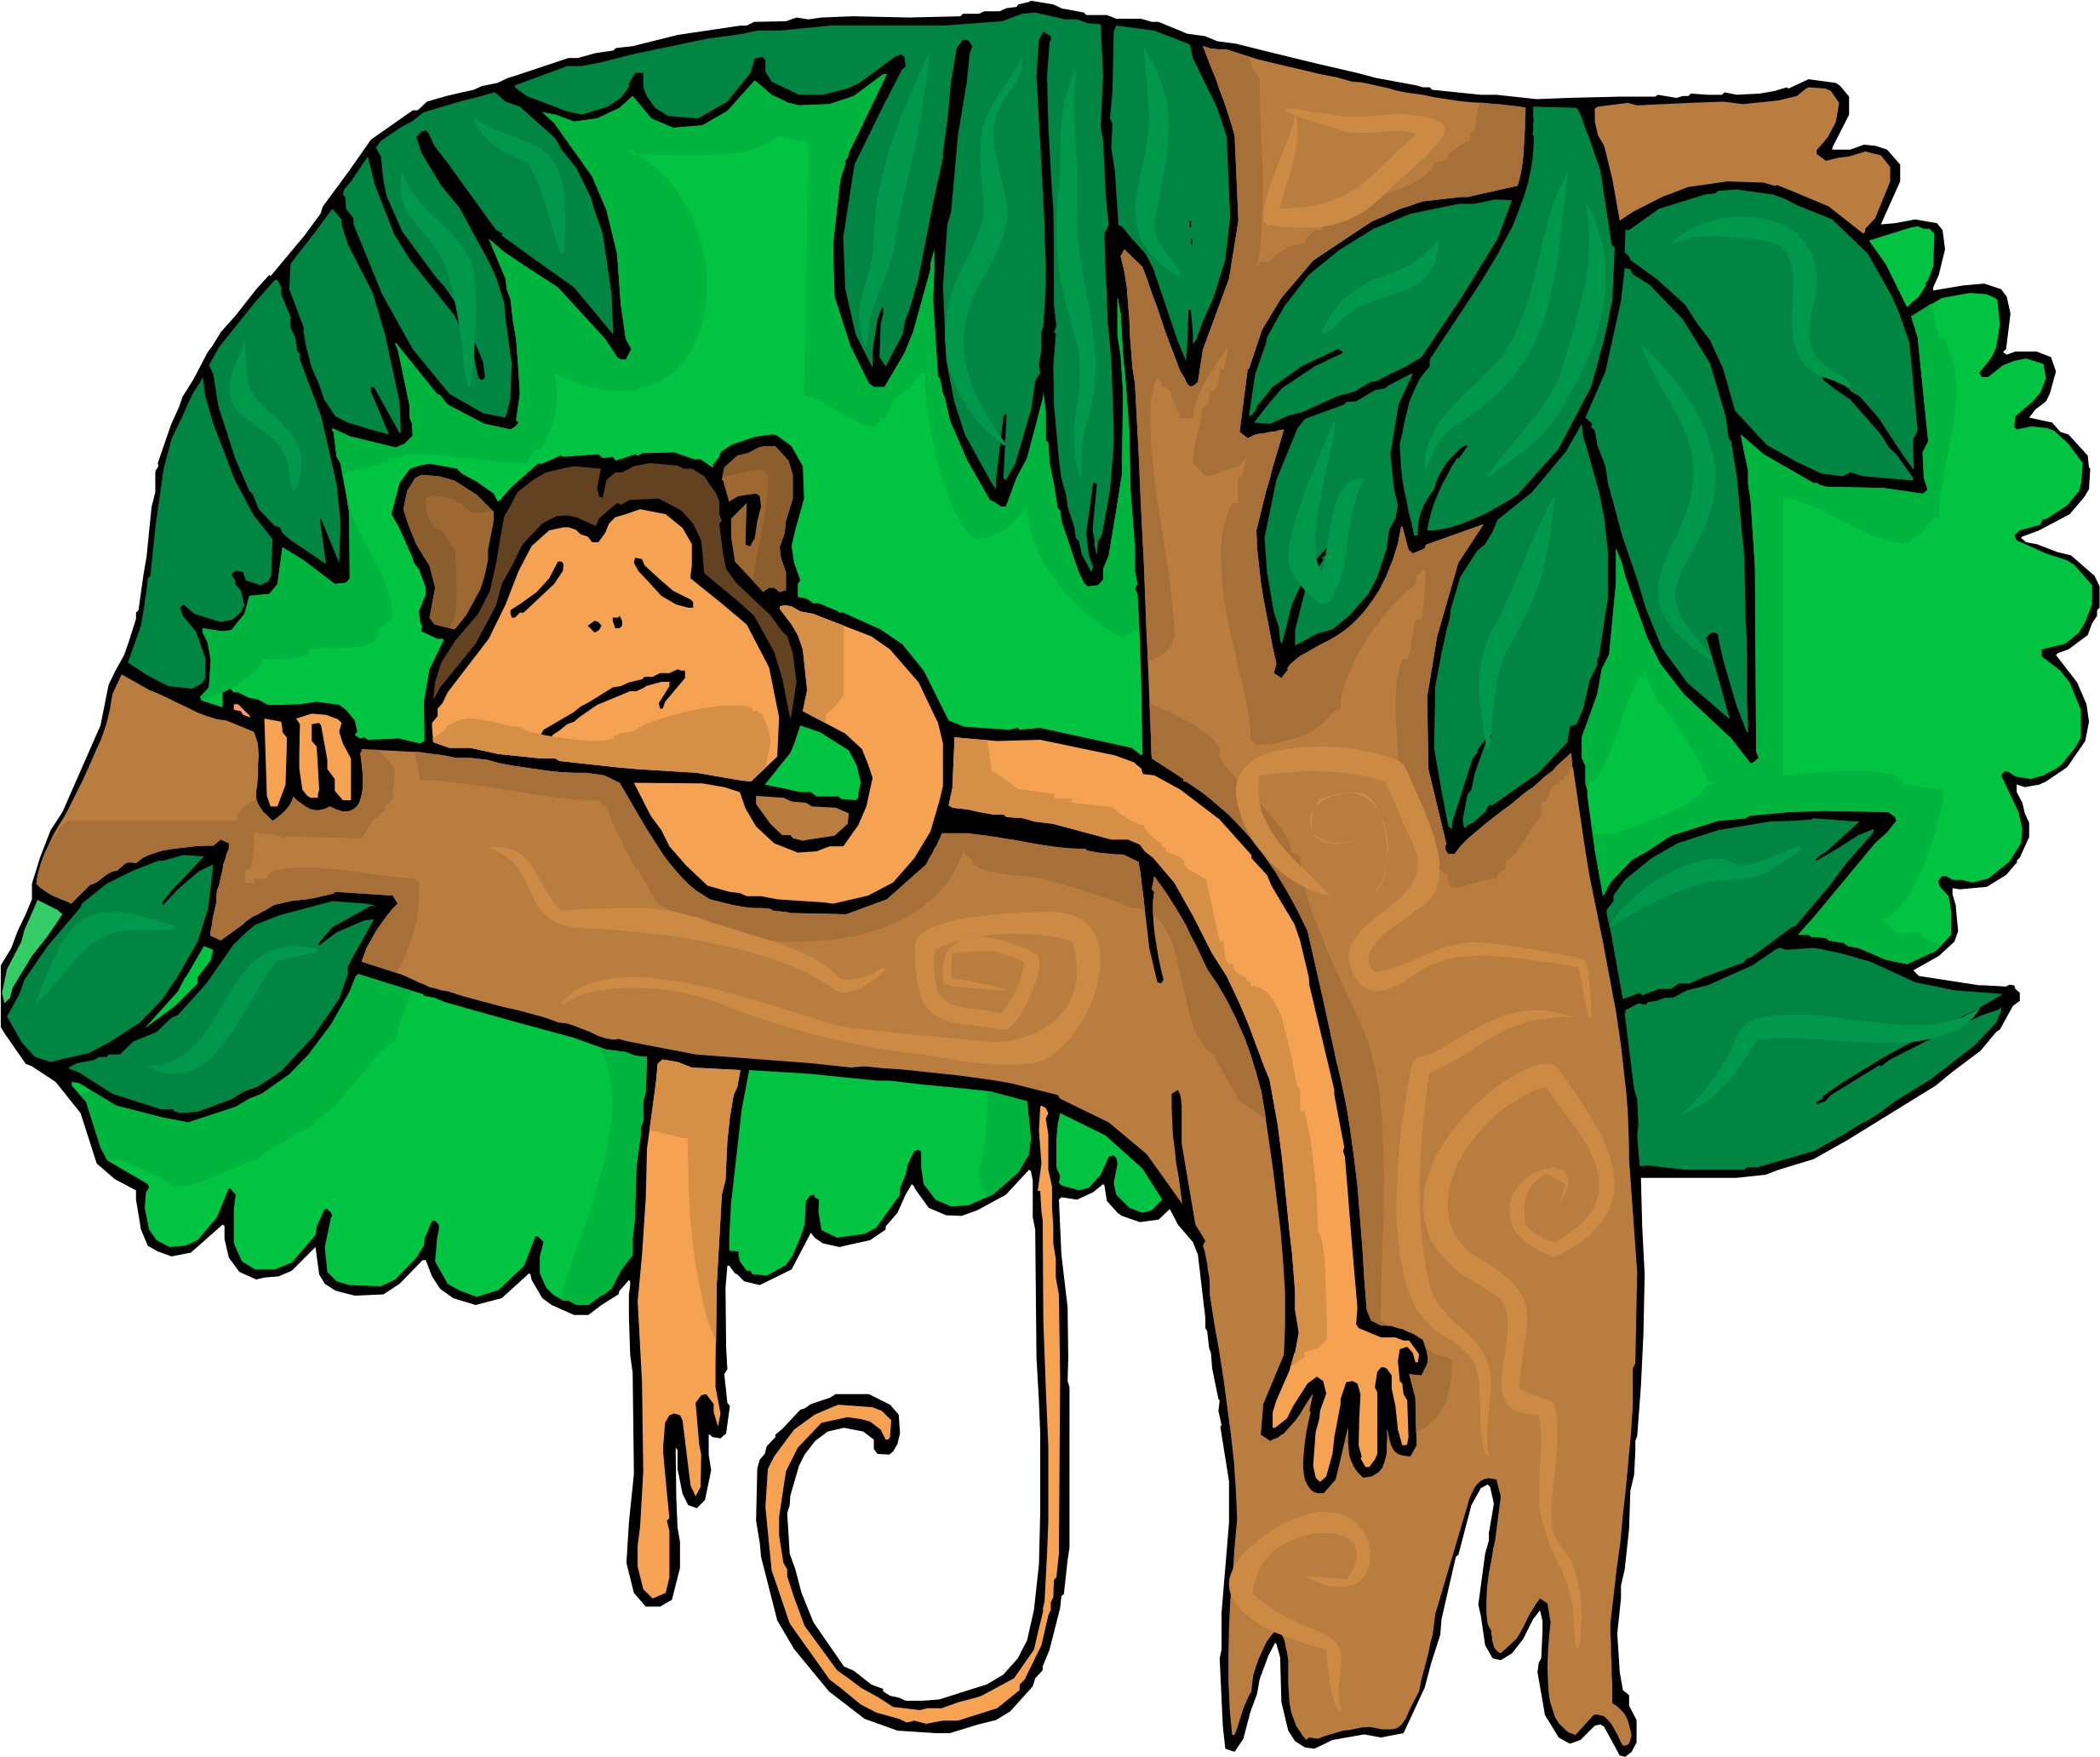 Monkey In A Tree Cartoon | Clipart Panda - Free Clipart Images